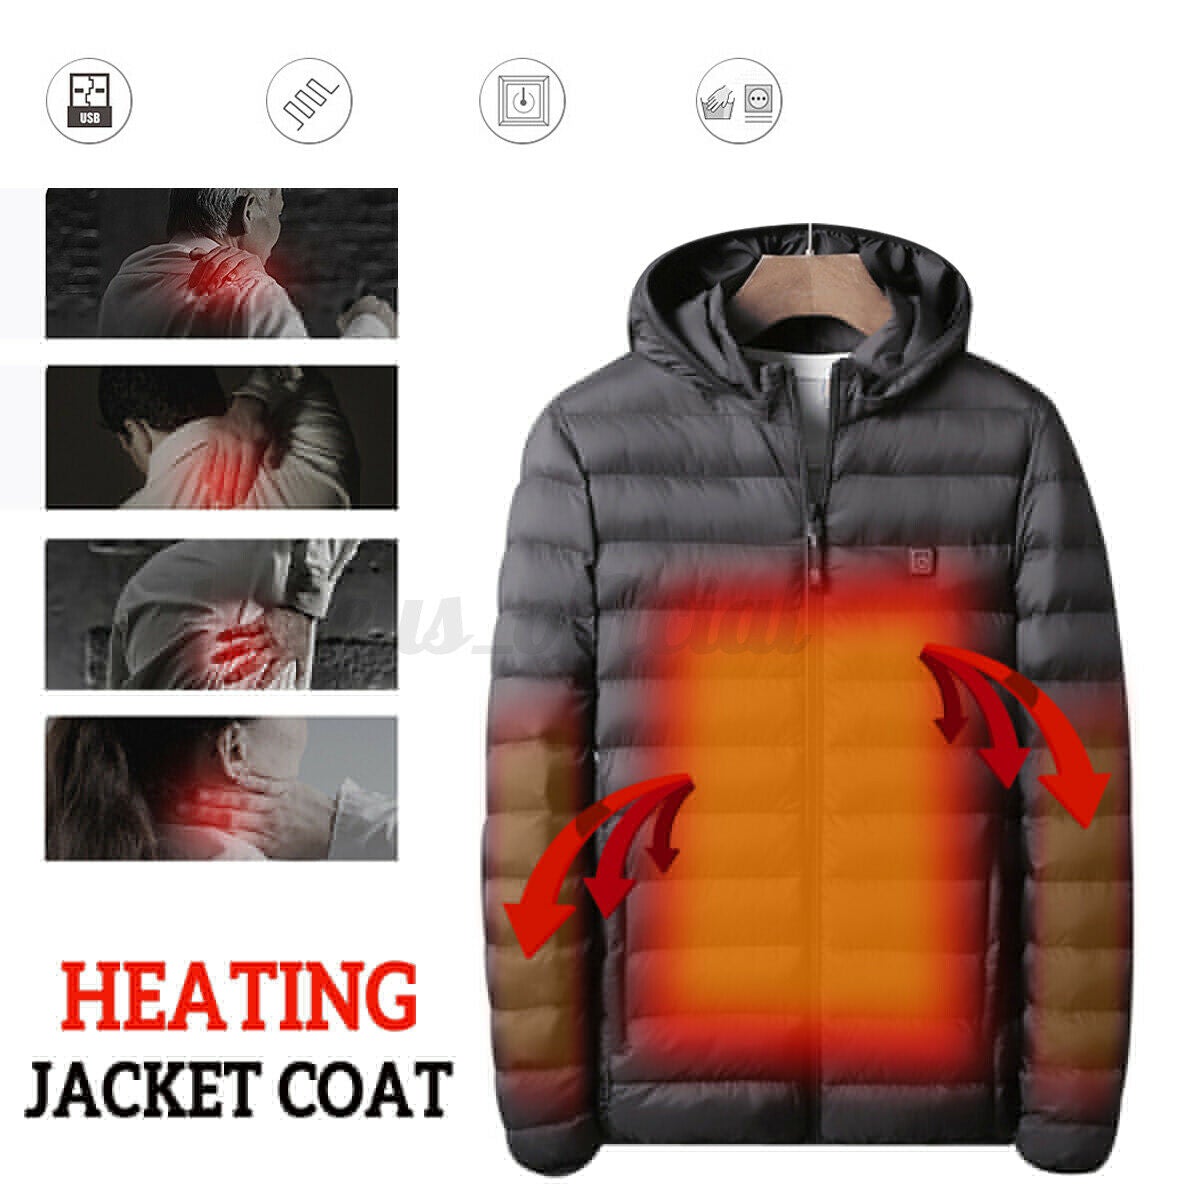 Temperature Control Smart Heated Jacket Electric Thermal Heated Outerwear - Home Decor Gifts and More